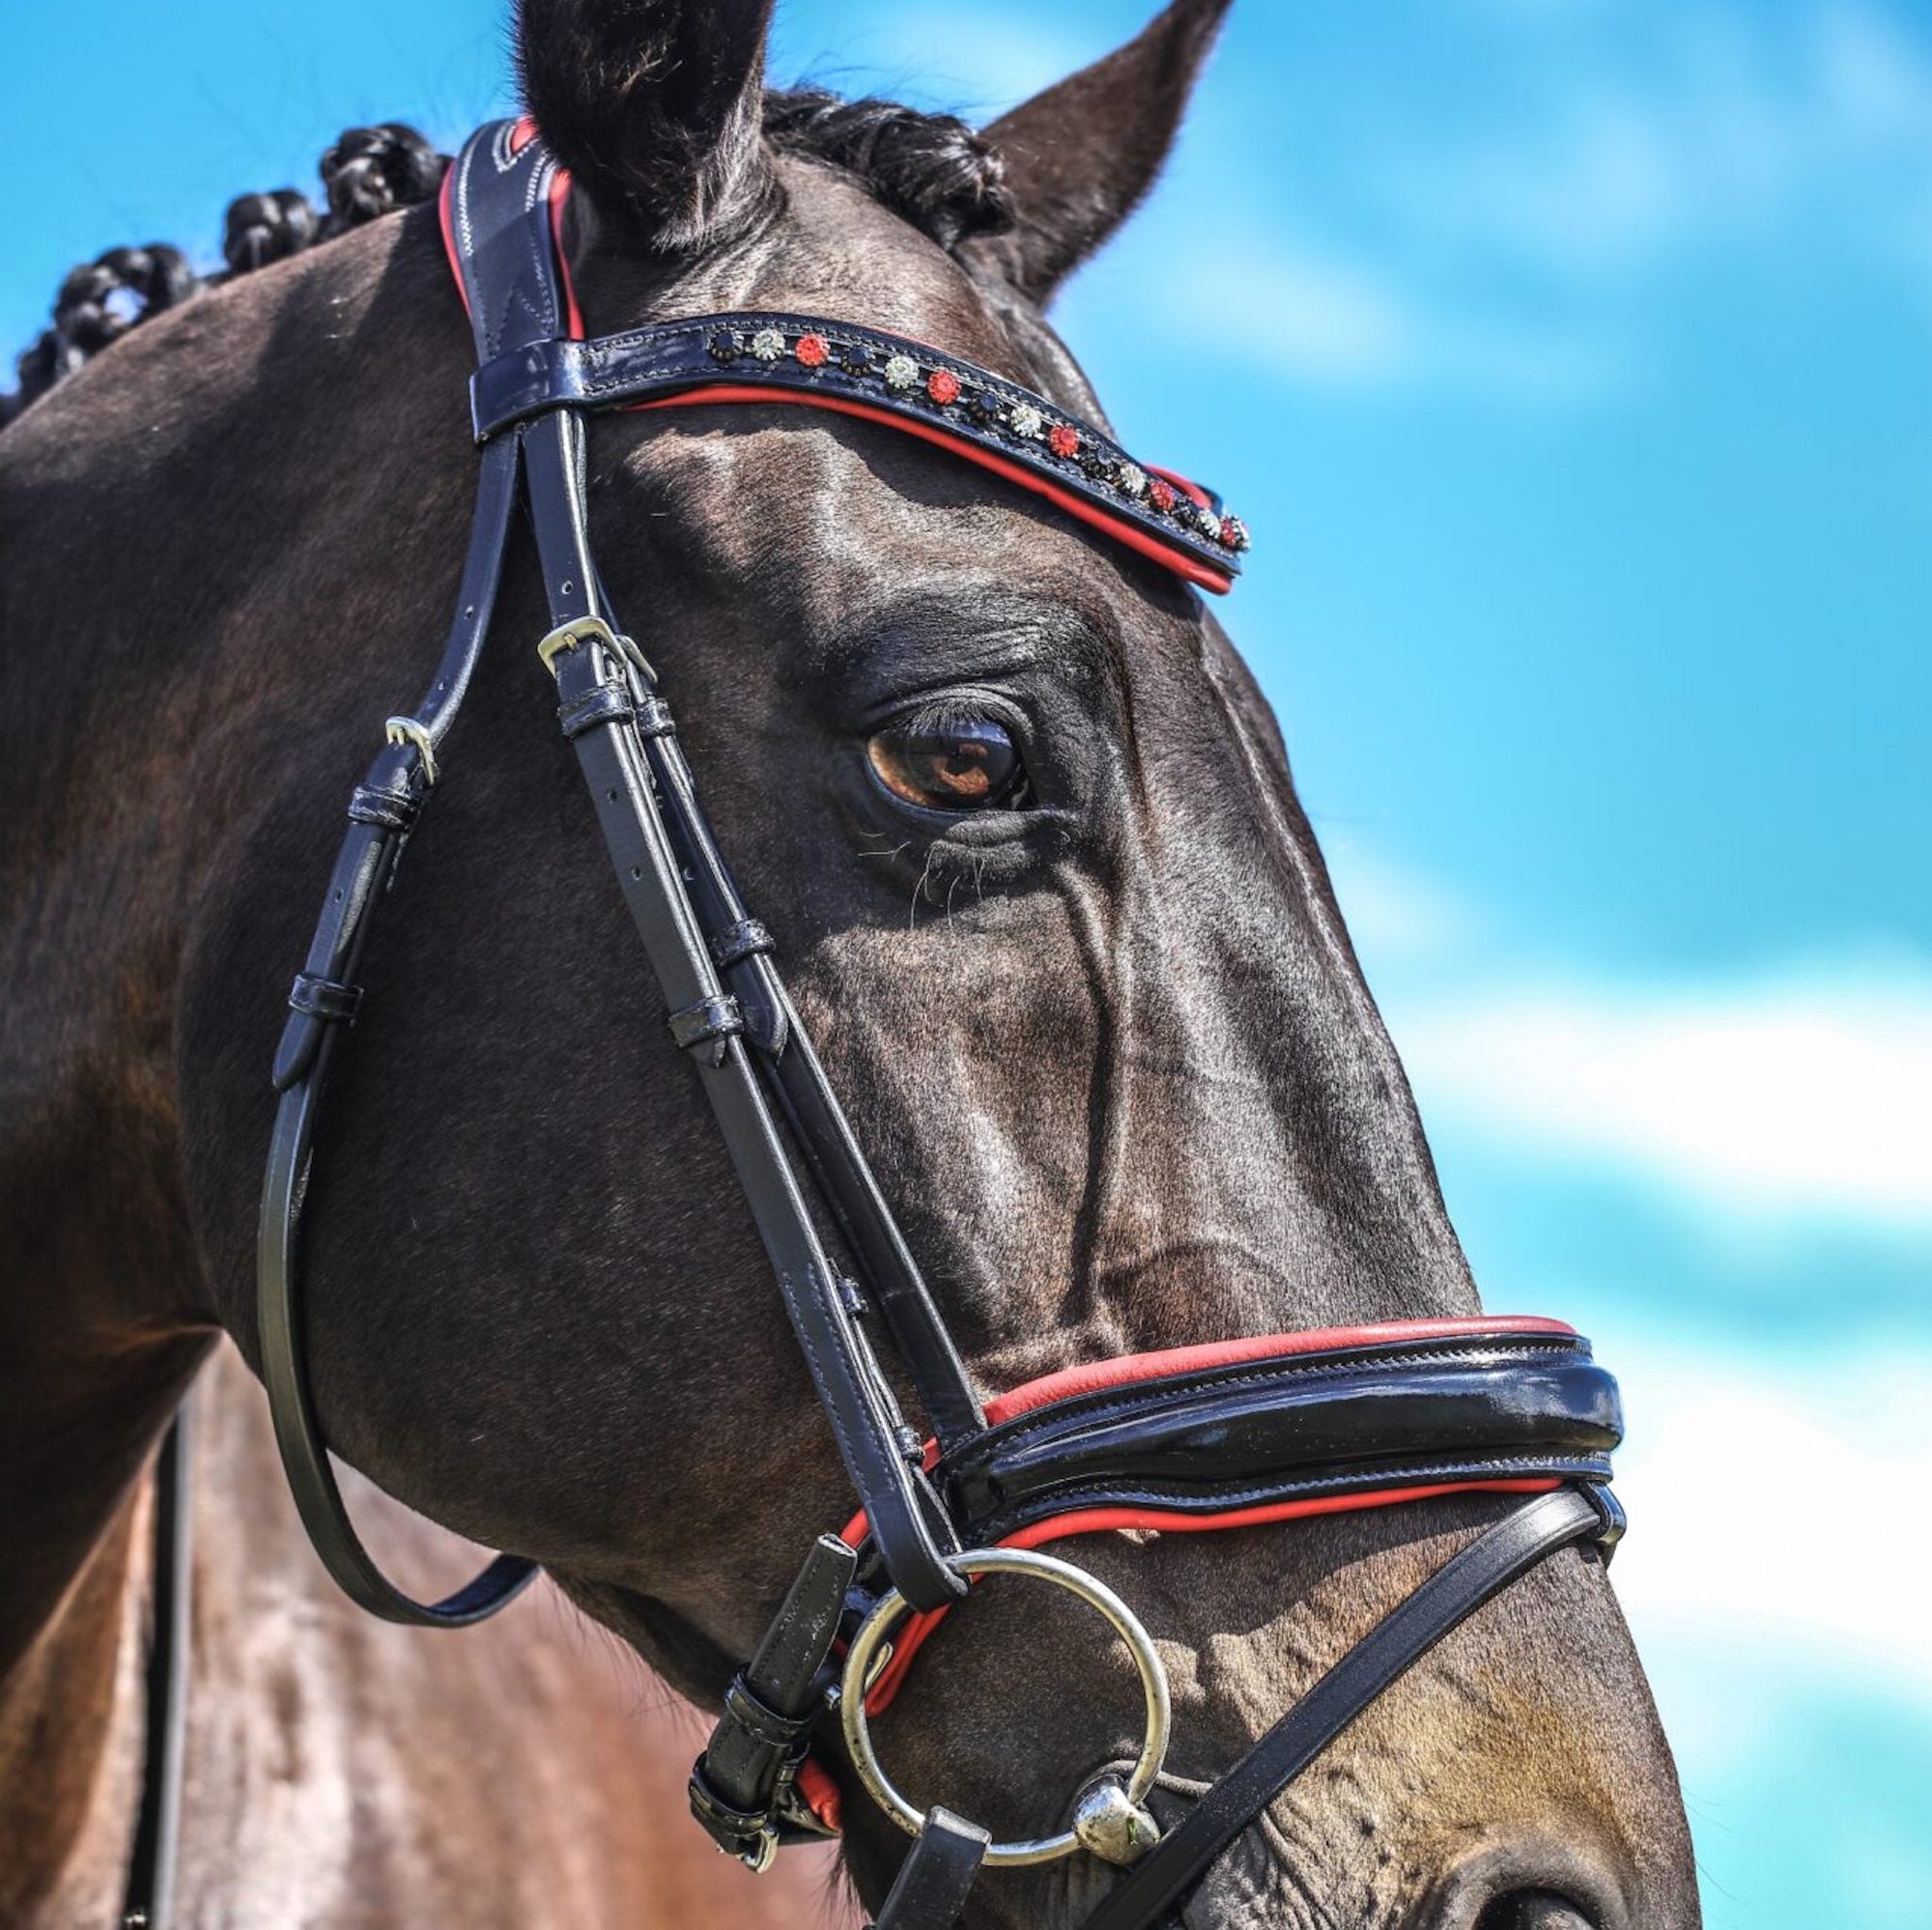 Horse wearing black leather bridle with red detailed nose and brow bands.